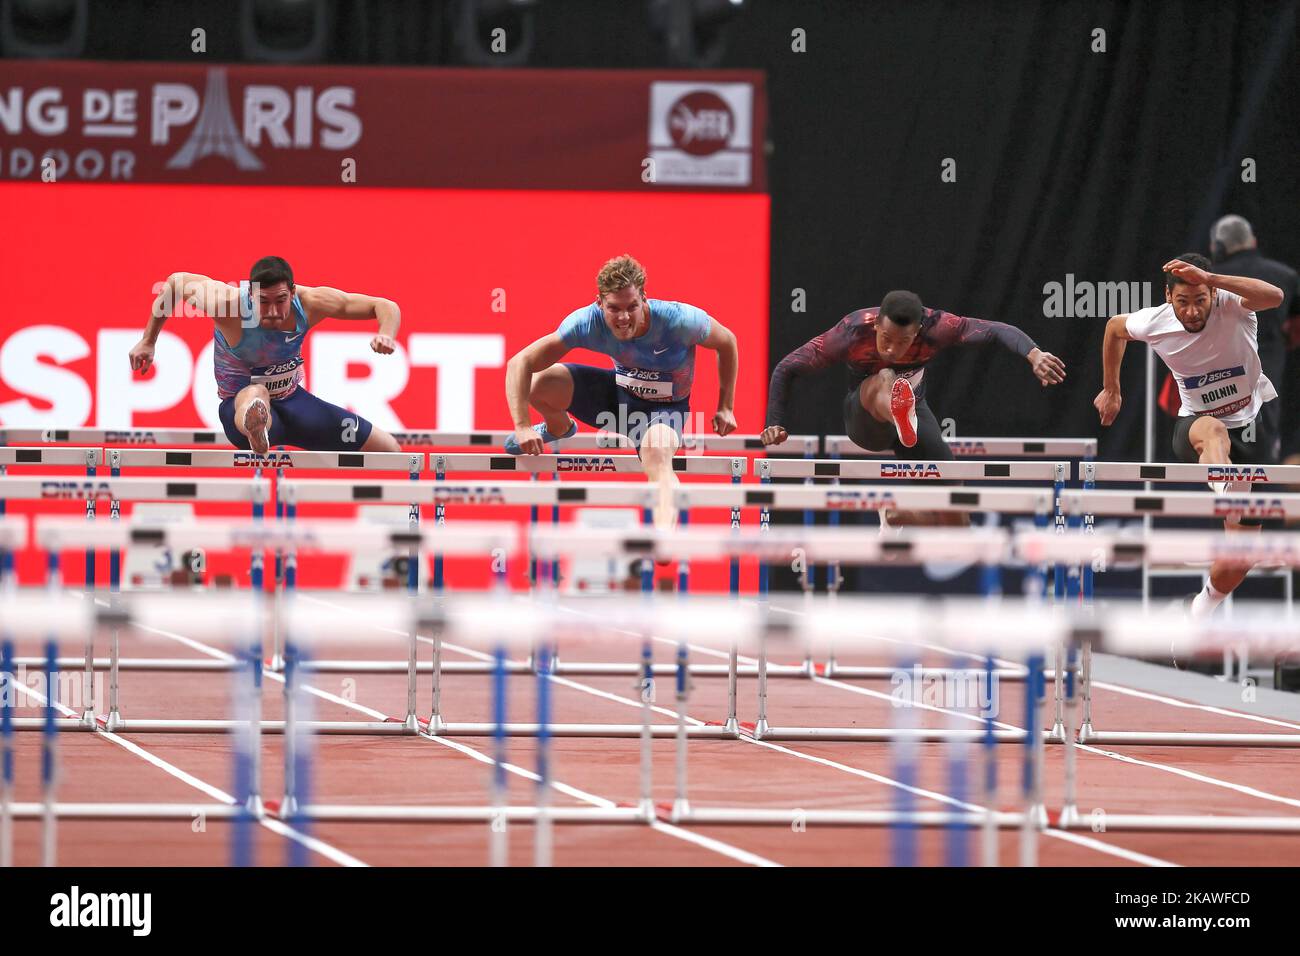 From left to right : Jorge Urena of Spain, Kevin Mayer of France, Ruben Gado of France, Basile Rolnin of France compete in 60m Triathlon during the Athletics Indoor Meeting of Paris 2018, at AccorHotels Arena (Bercy) in Paris, France on February 7, 2018. (Photo by Michel Stoupak/NurPhoto) Stock Photo